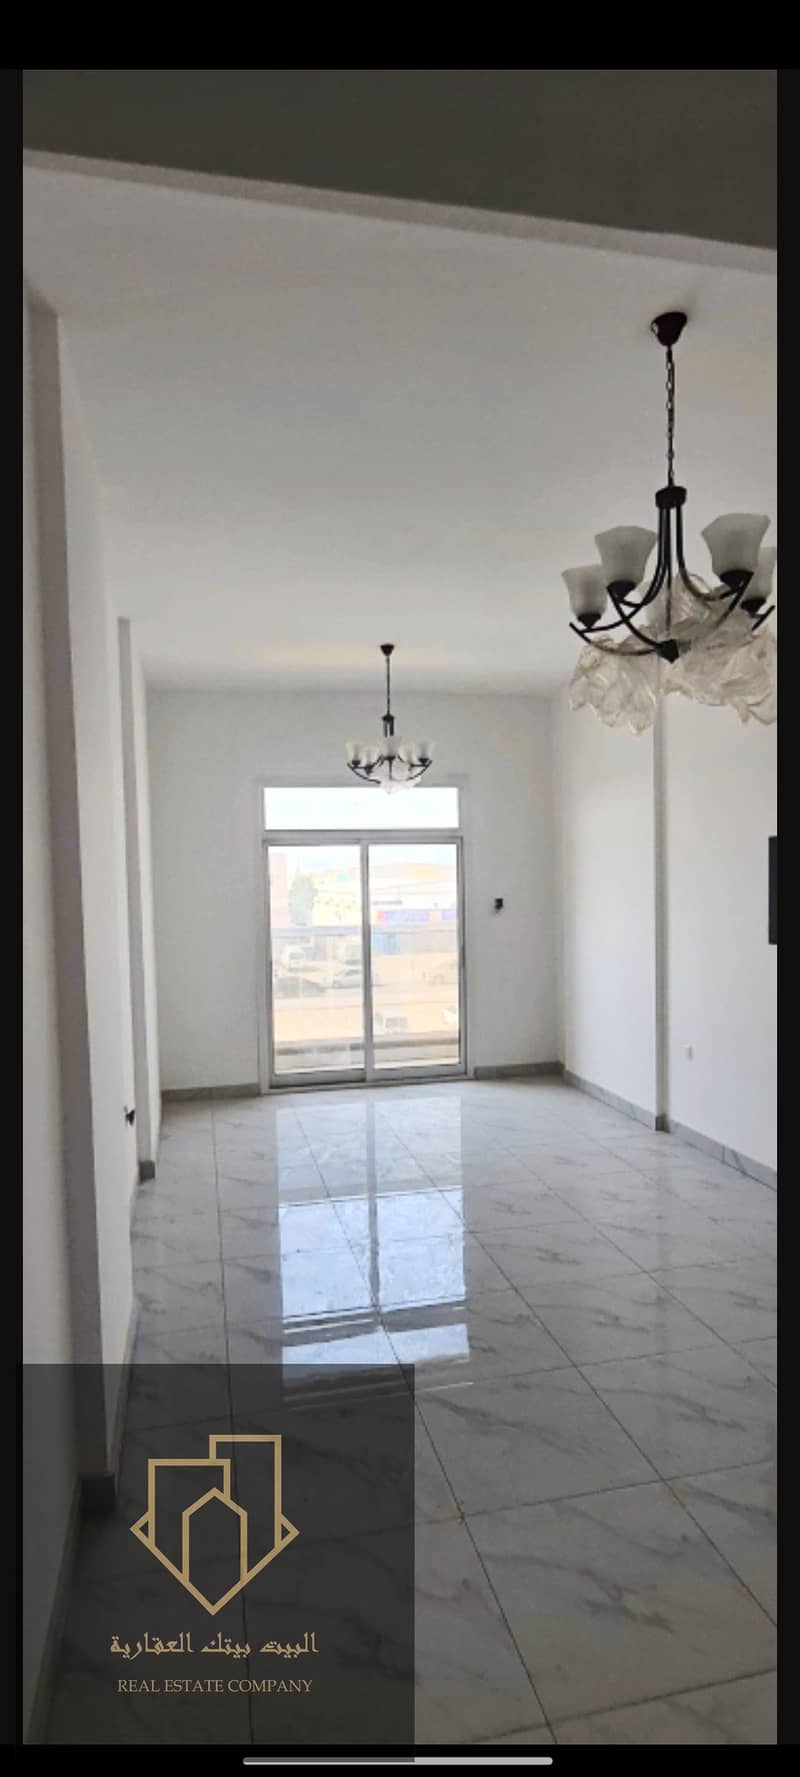 For lovers of excellence, enjoy comfort and luxury in this luxurious apartment. It is characterized by an excellent location and an excellent design with the best materials and finishes to ensure comfort and luxury. There are excellent spaces with payment